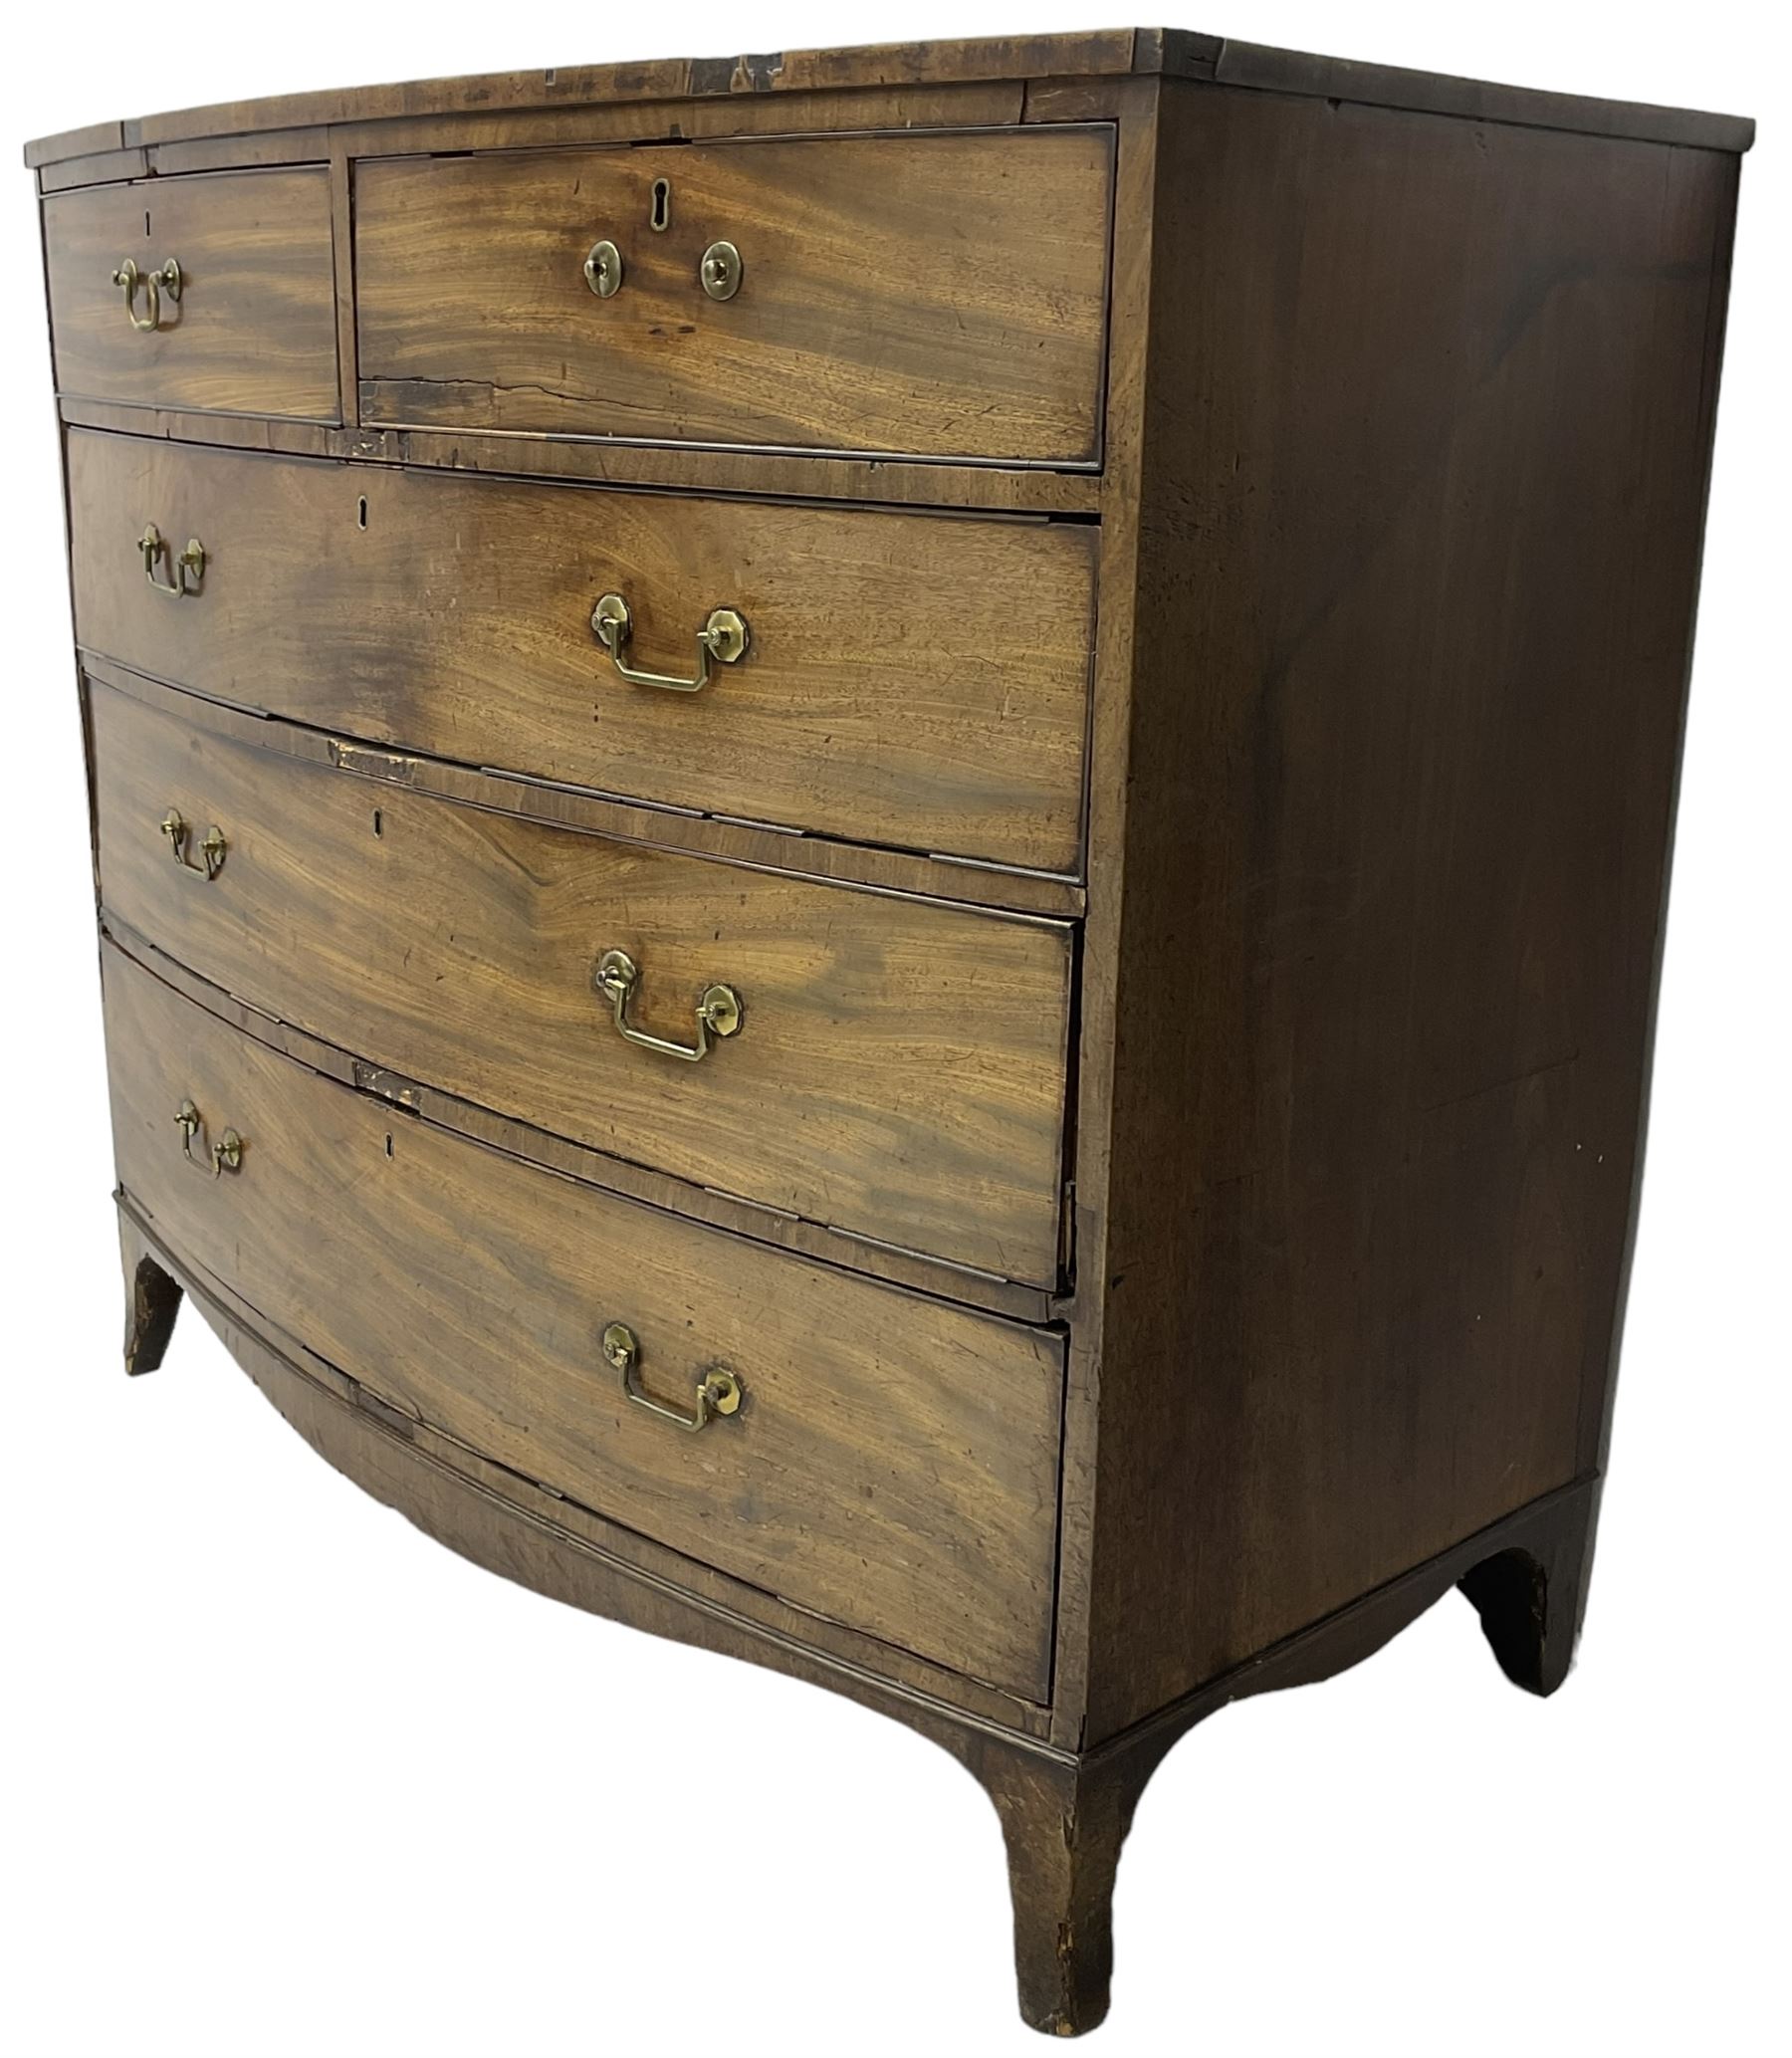 Early 19th century mahogany bow-front chest - Image 6 of 7